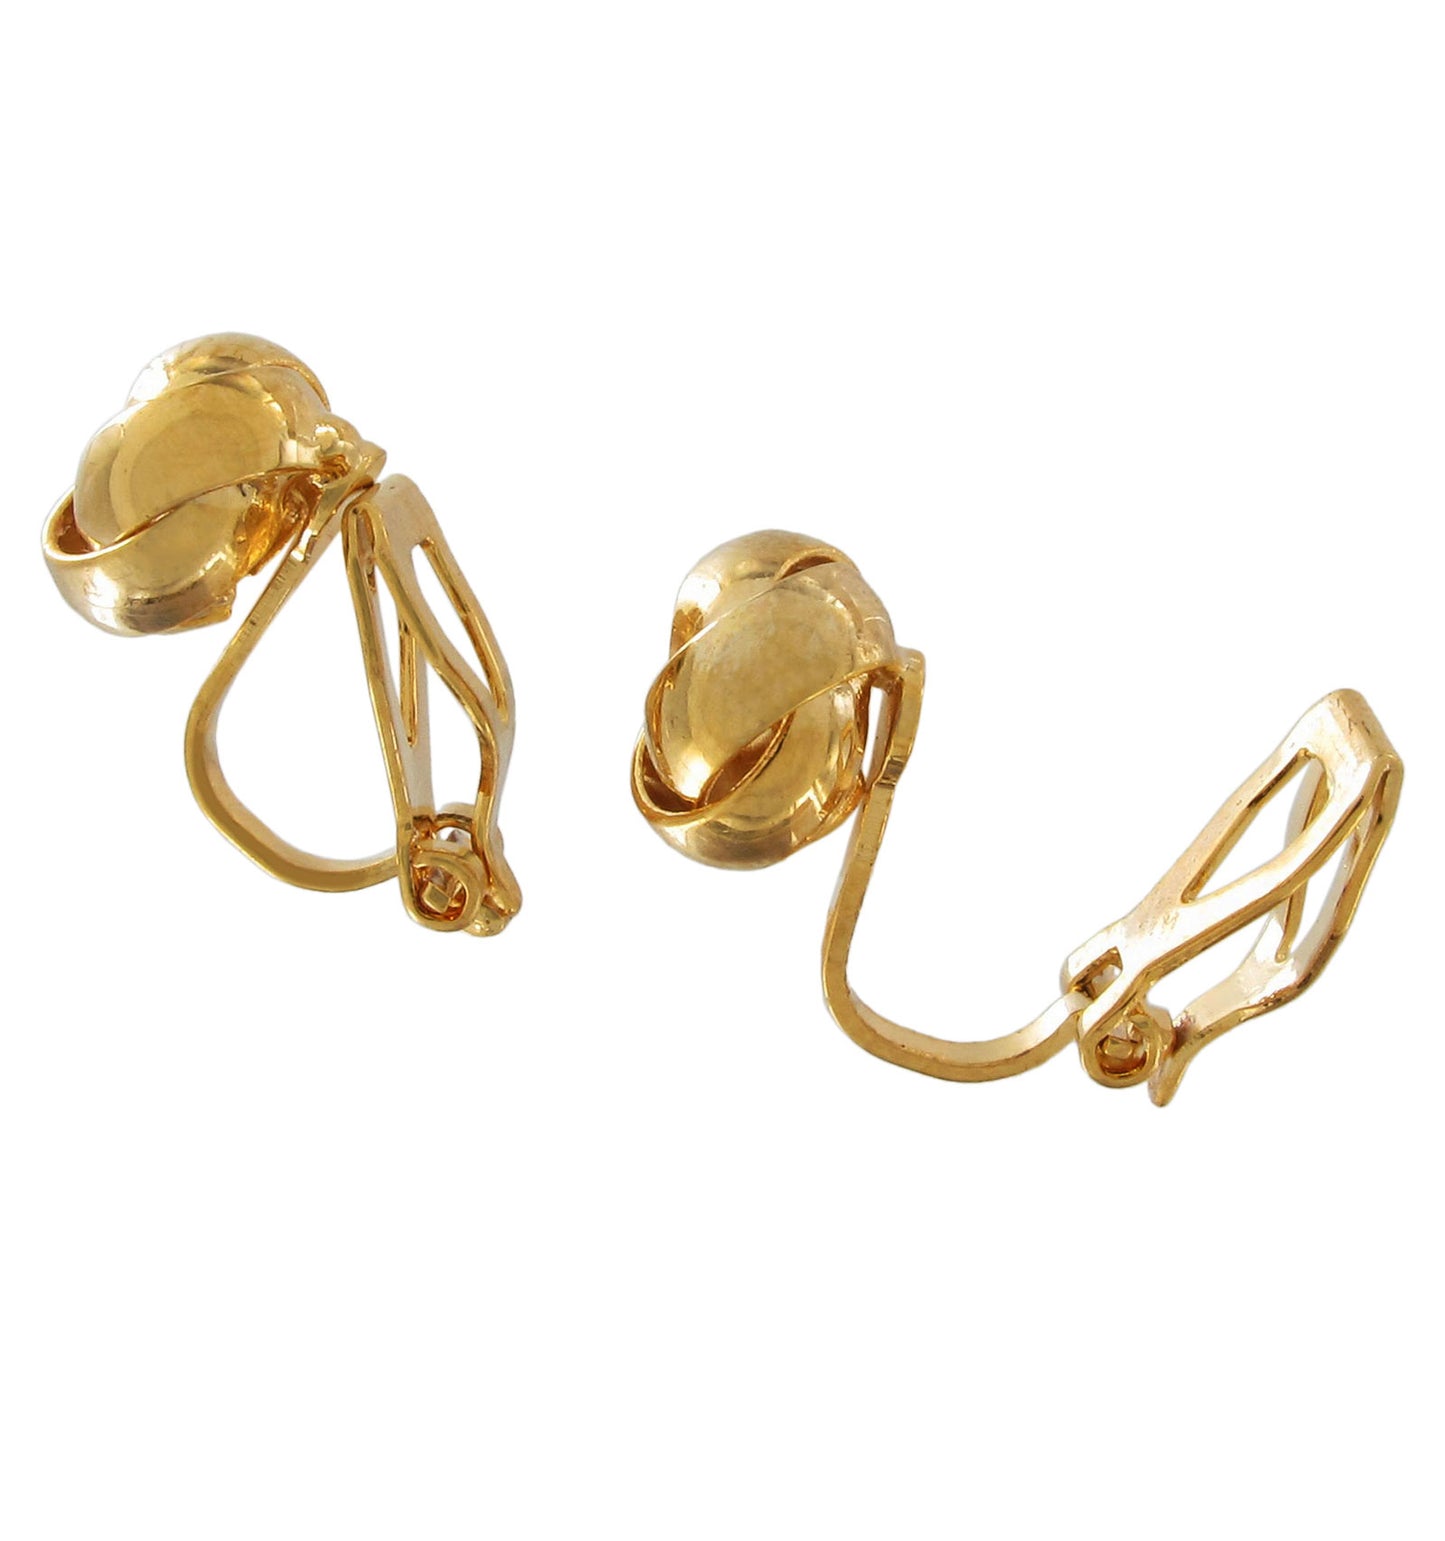 Gold Tone Twisted Love Knot Clip Earrings Small